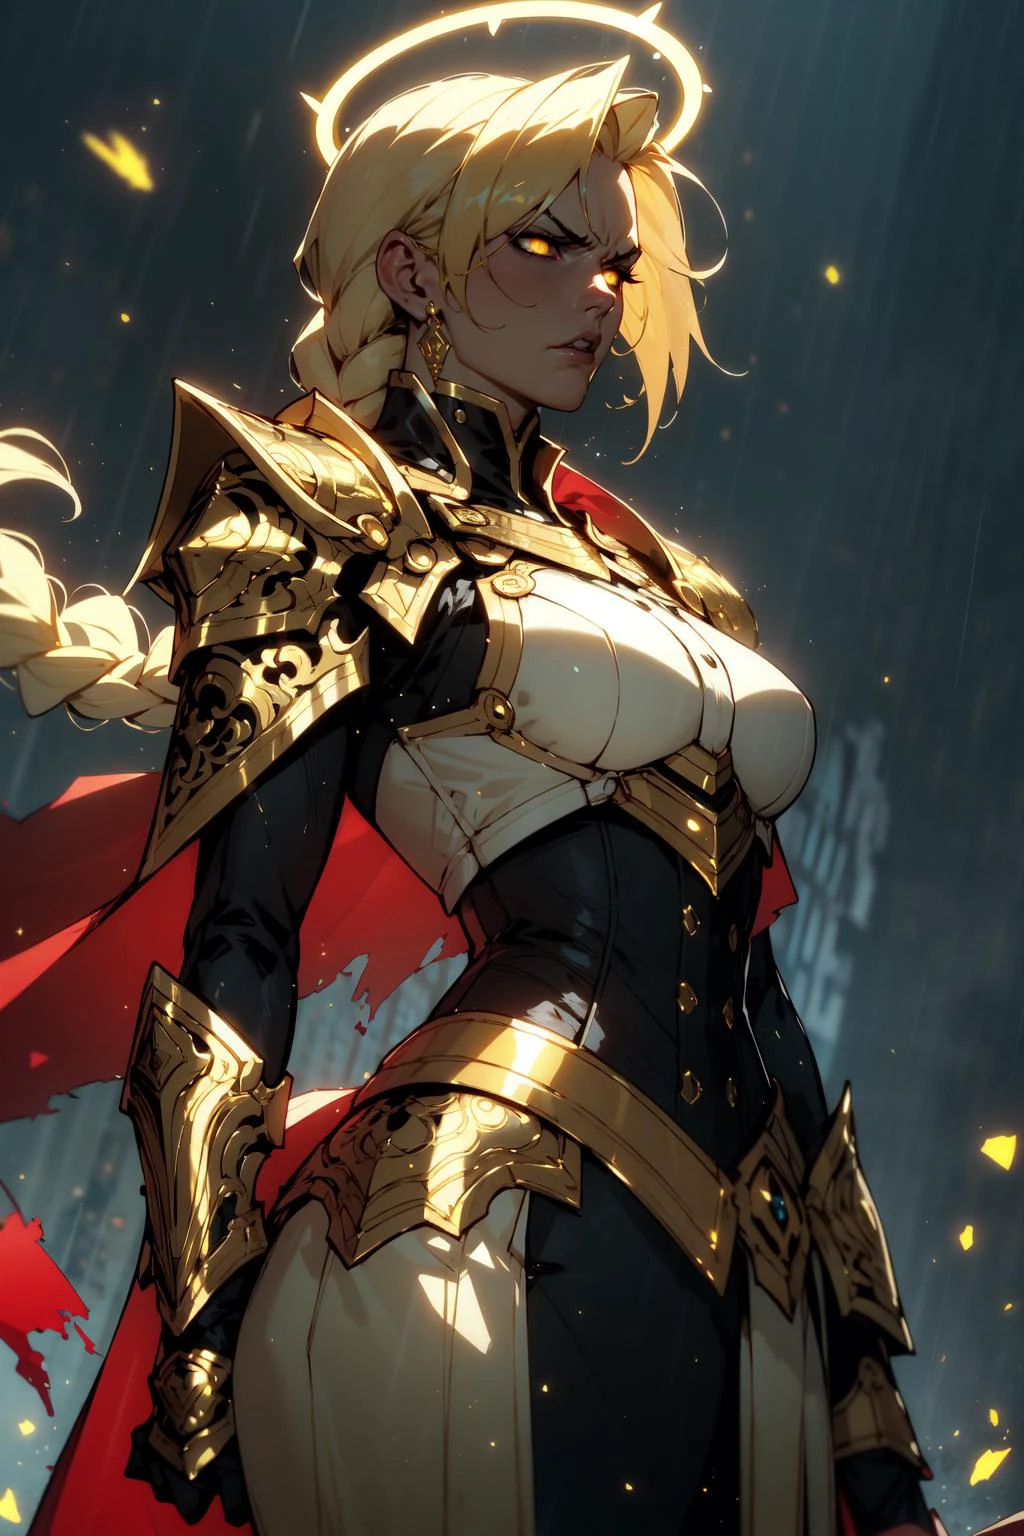 cowboy shot of paladin lady, ornate golden armor, white breastplate, black corset, golden ornate pauldrons, blonde hair, braid, torn red cape, glowing yellow eyes, glowing halo, angry, night, rain, golden holy aura glow, particles,  